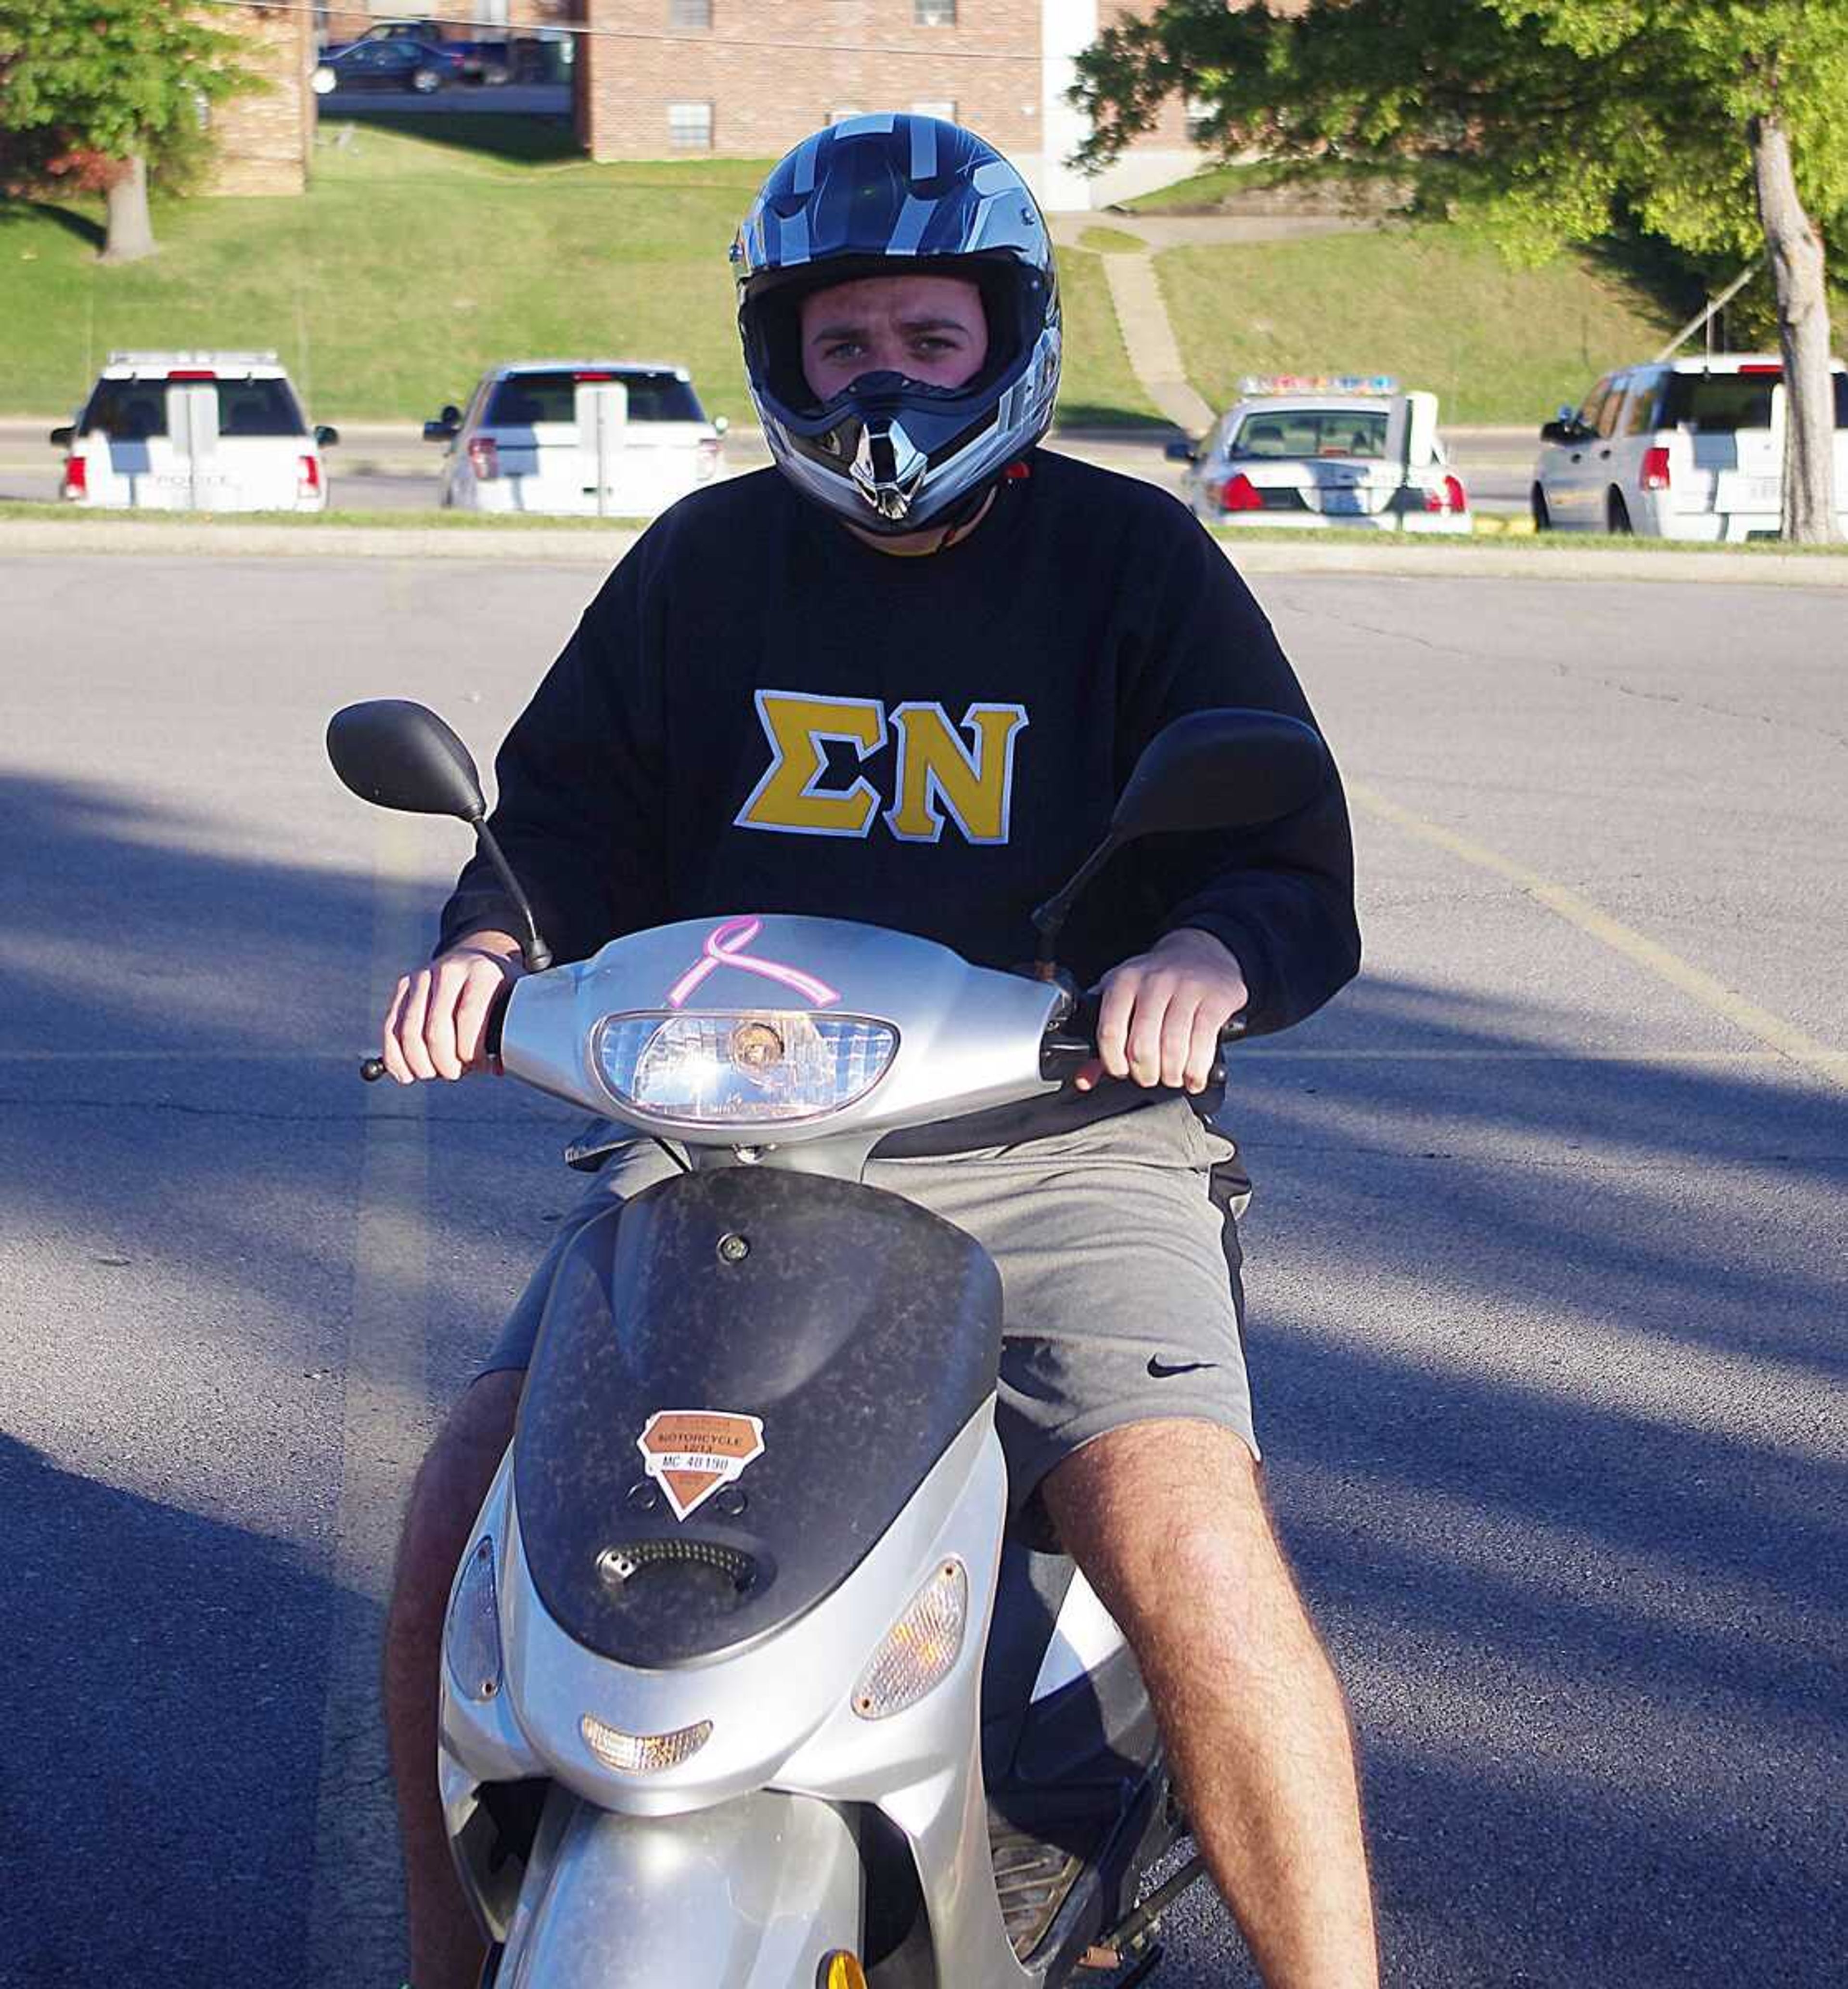 Jason Billmeyer wears a helmet while riding his scooter Monday on campus. Photo by Nathan Hamilton